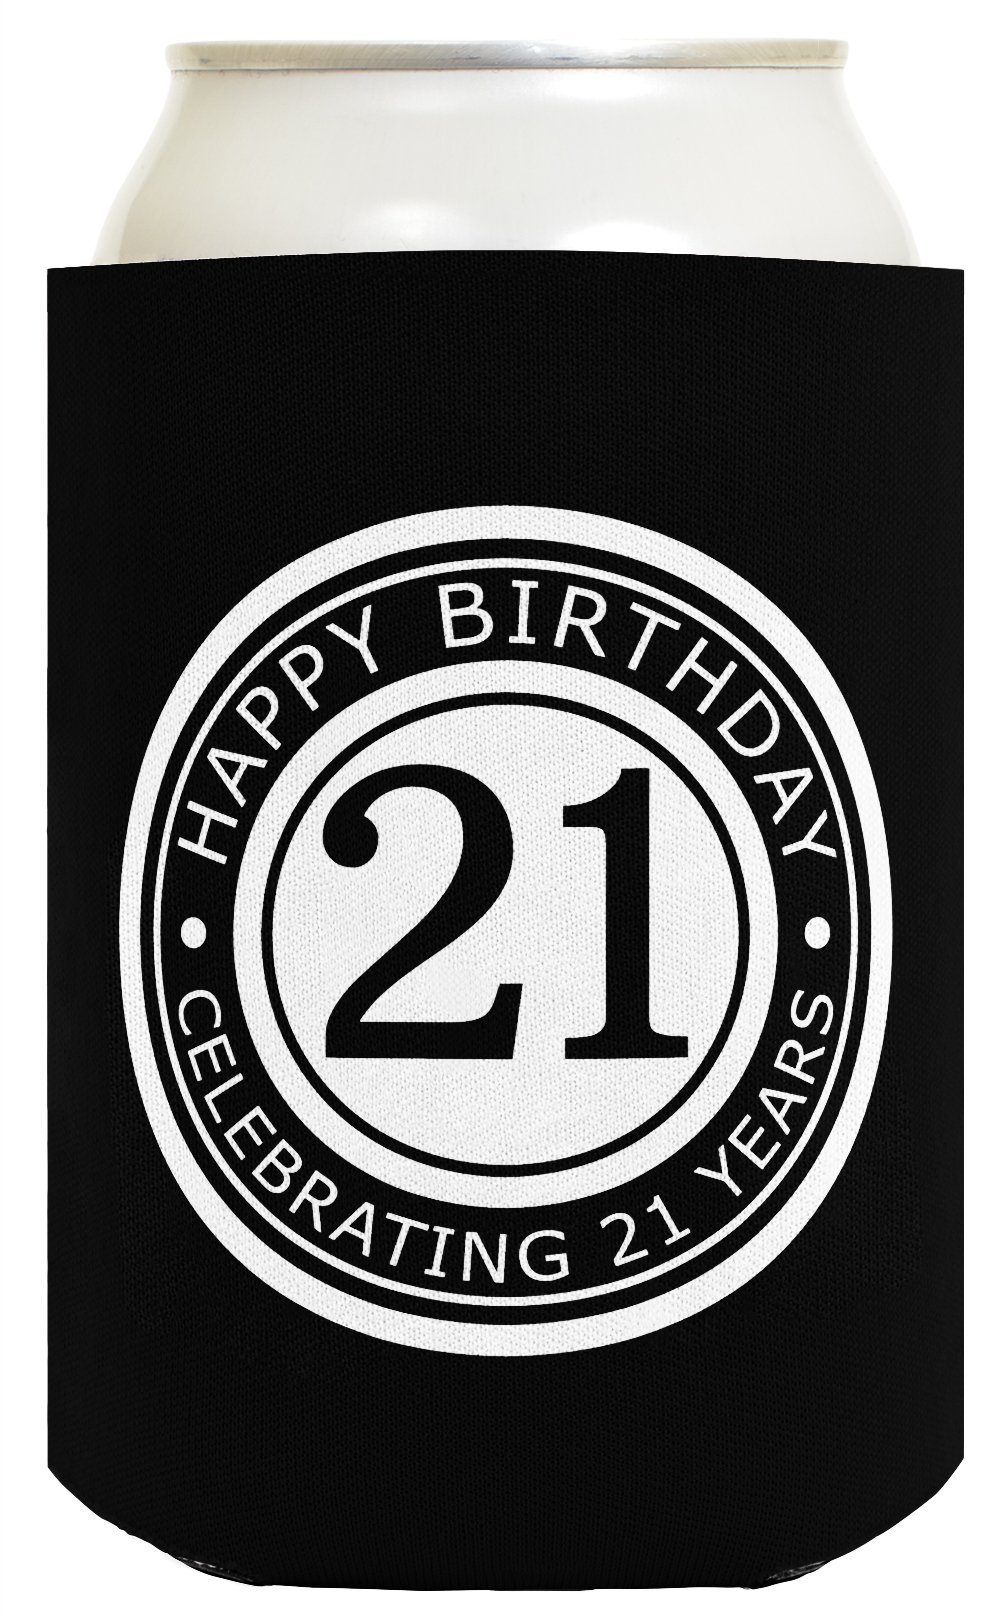 21st Birthday Gift Celebrating 21 Years 12 Pack Can Coolies Drink Coolers Black